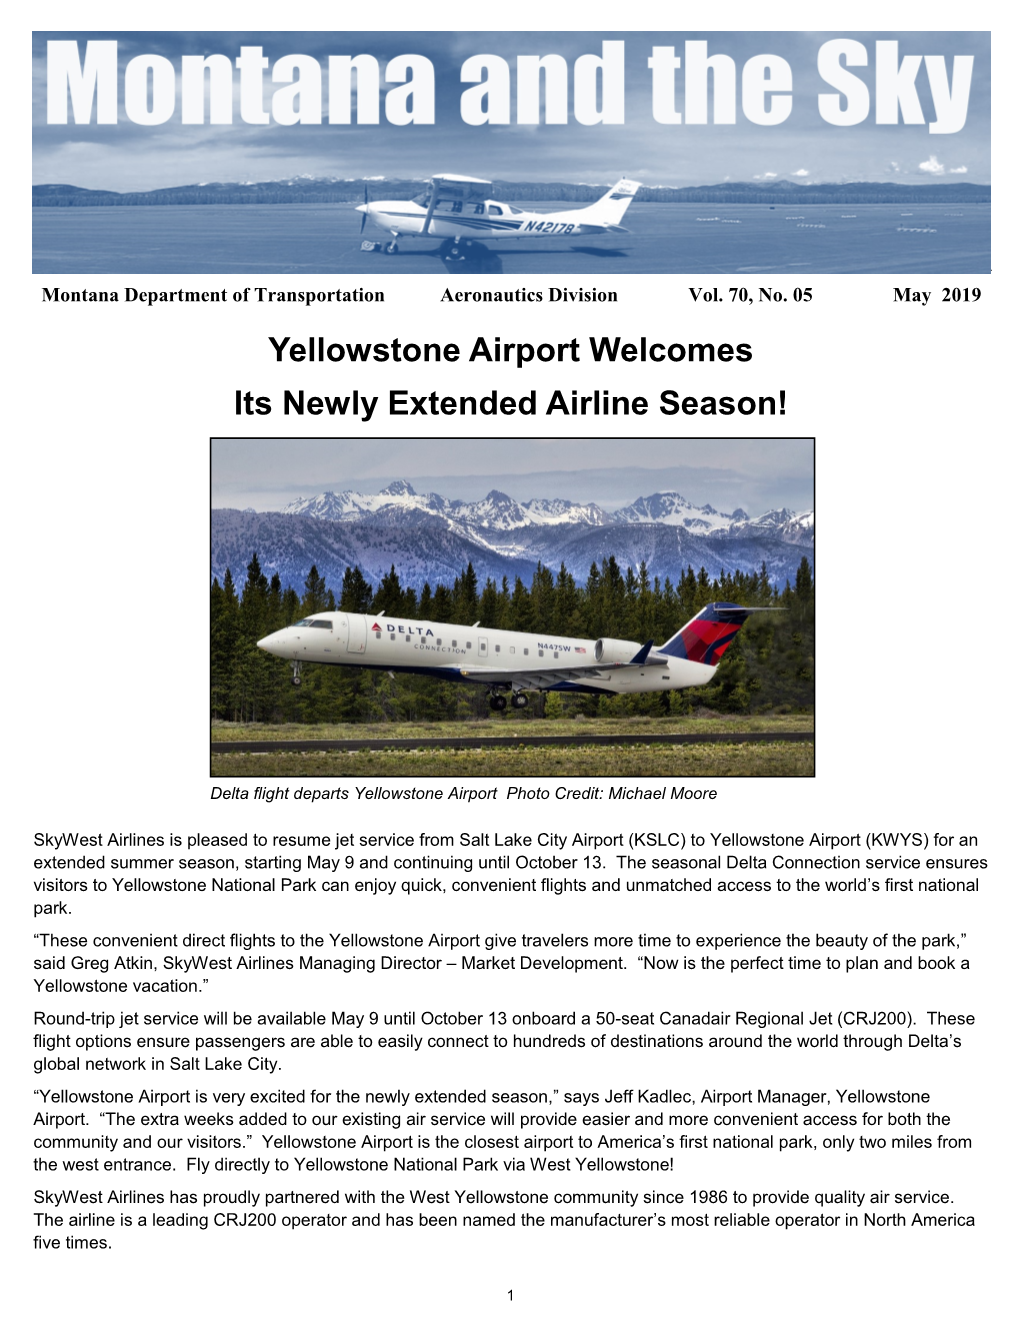 Yellowstone Airport Welcomes Its Newly Extended Airline Season!